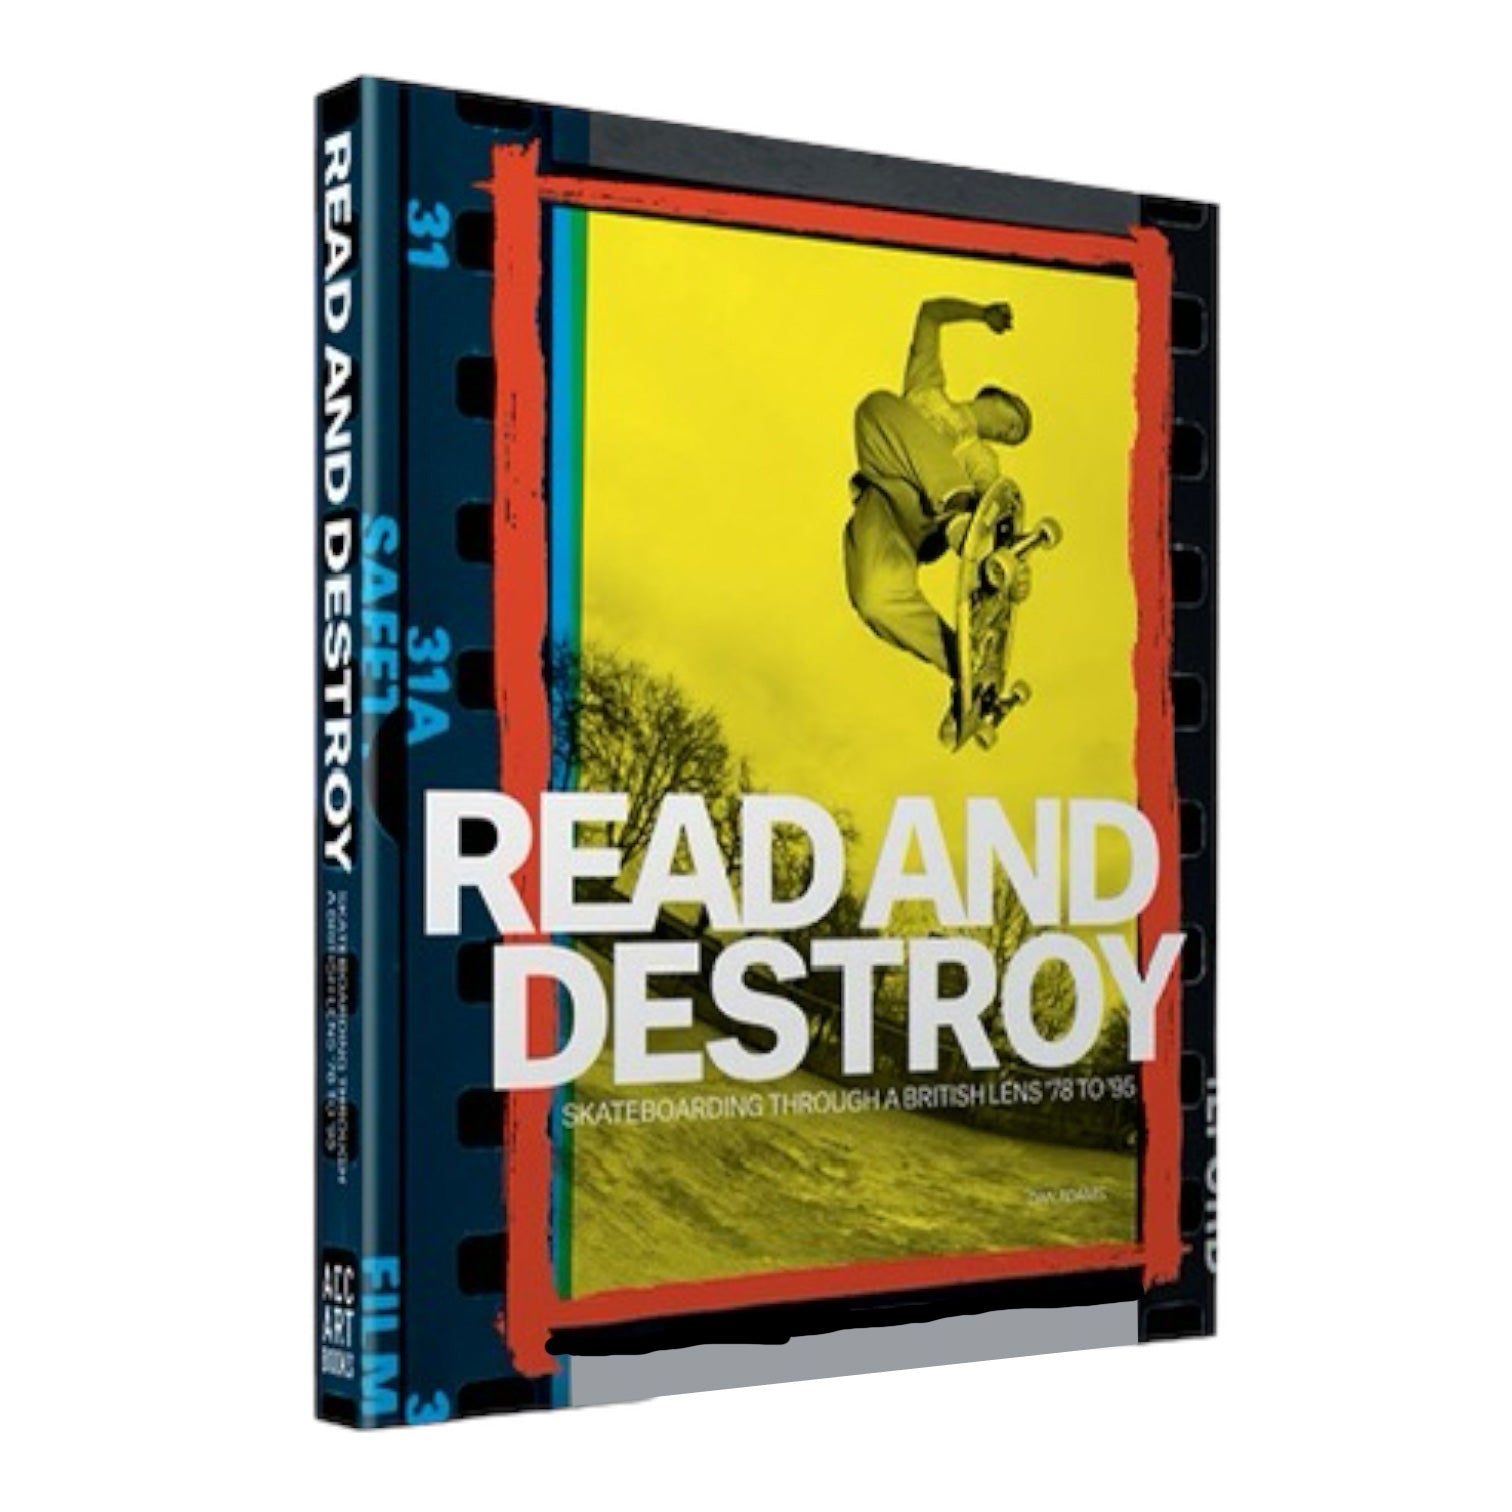 Read And Destroy - Skateboarding Through A British Lens 1998 to 1995